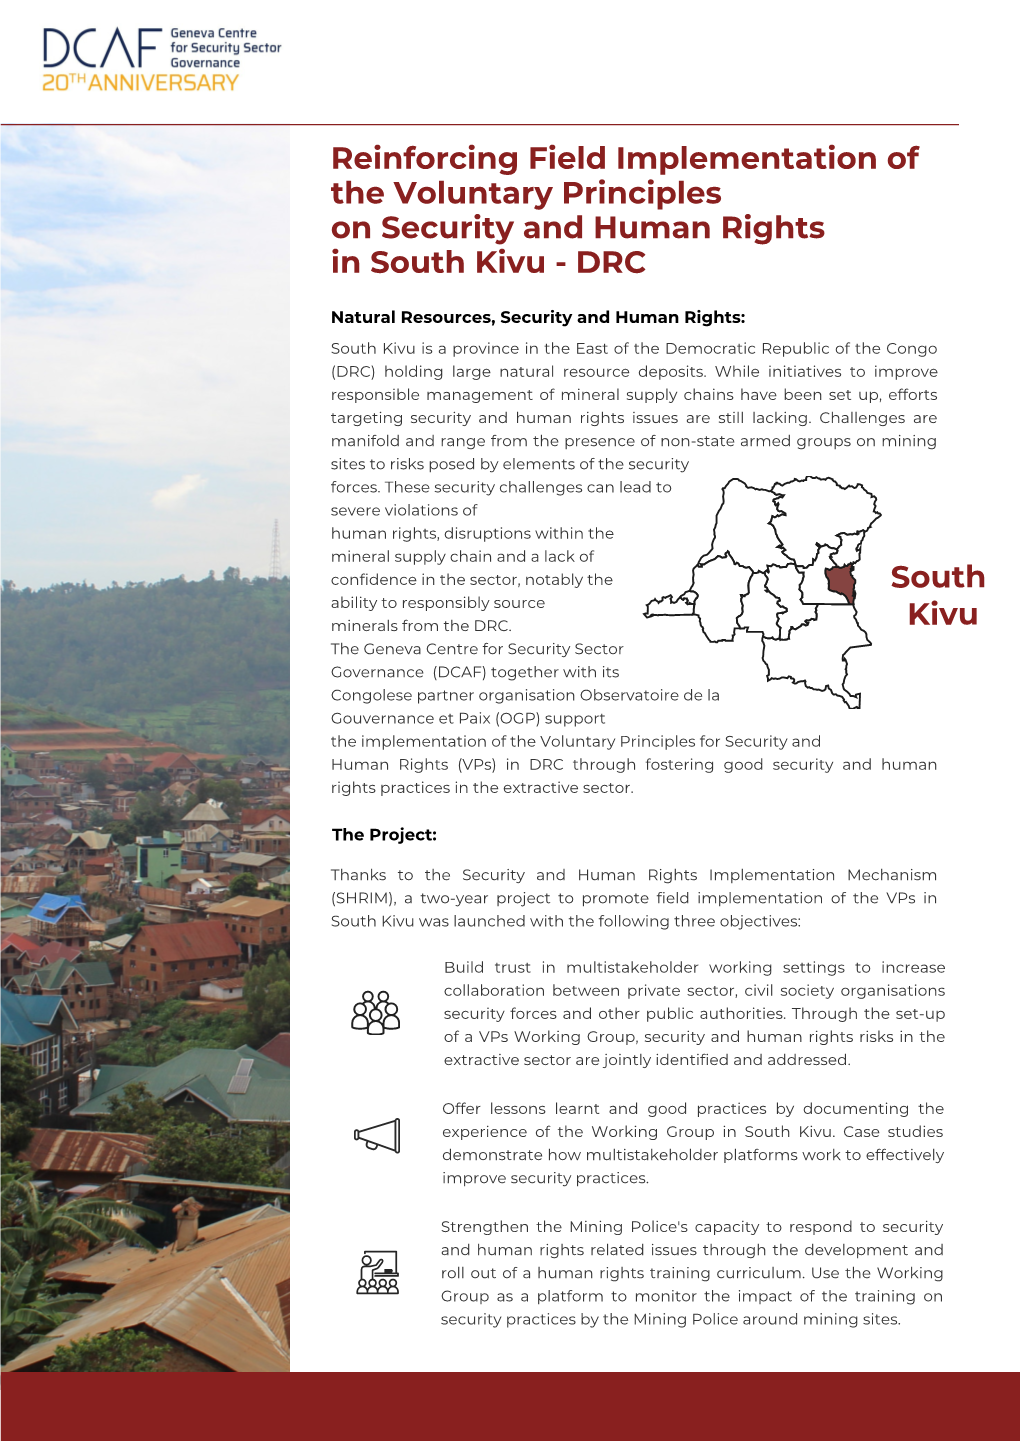 South Kivu Reinforcing Field Implementation of the Voluntary